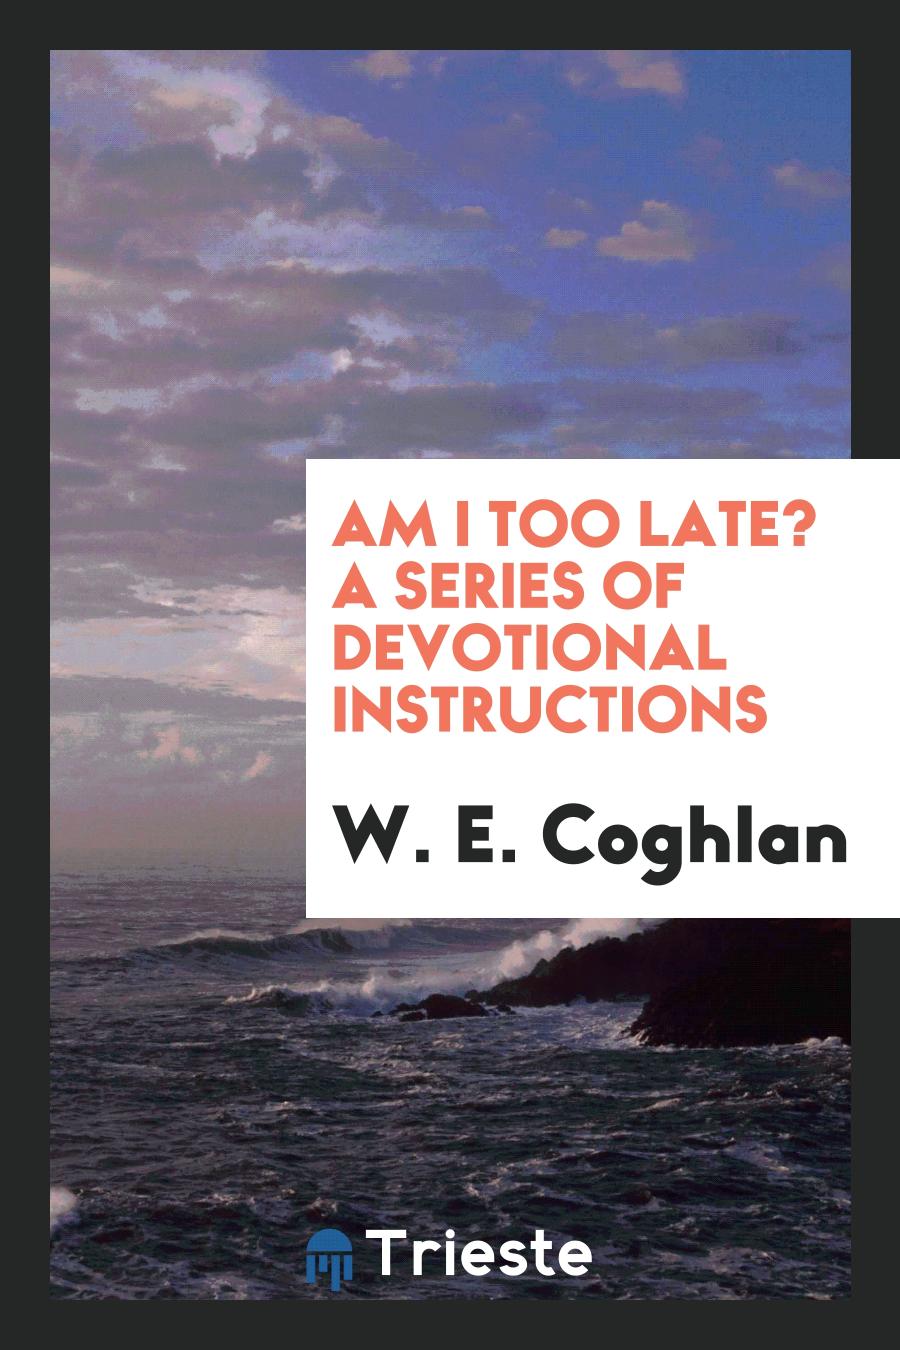 Am I Too Late? A Series of Devotional Instructions